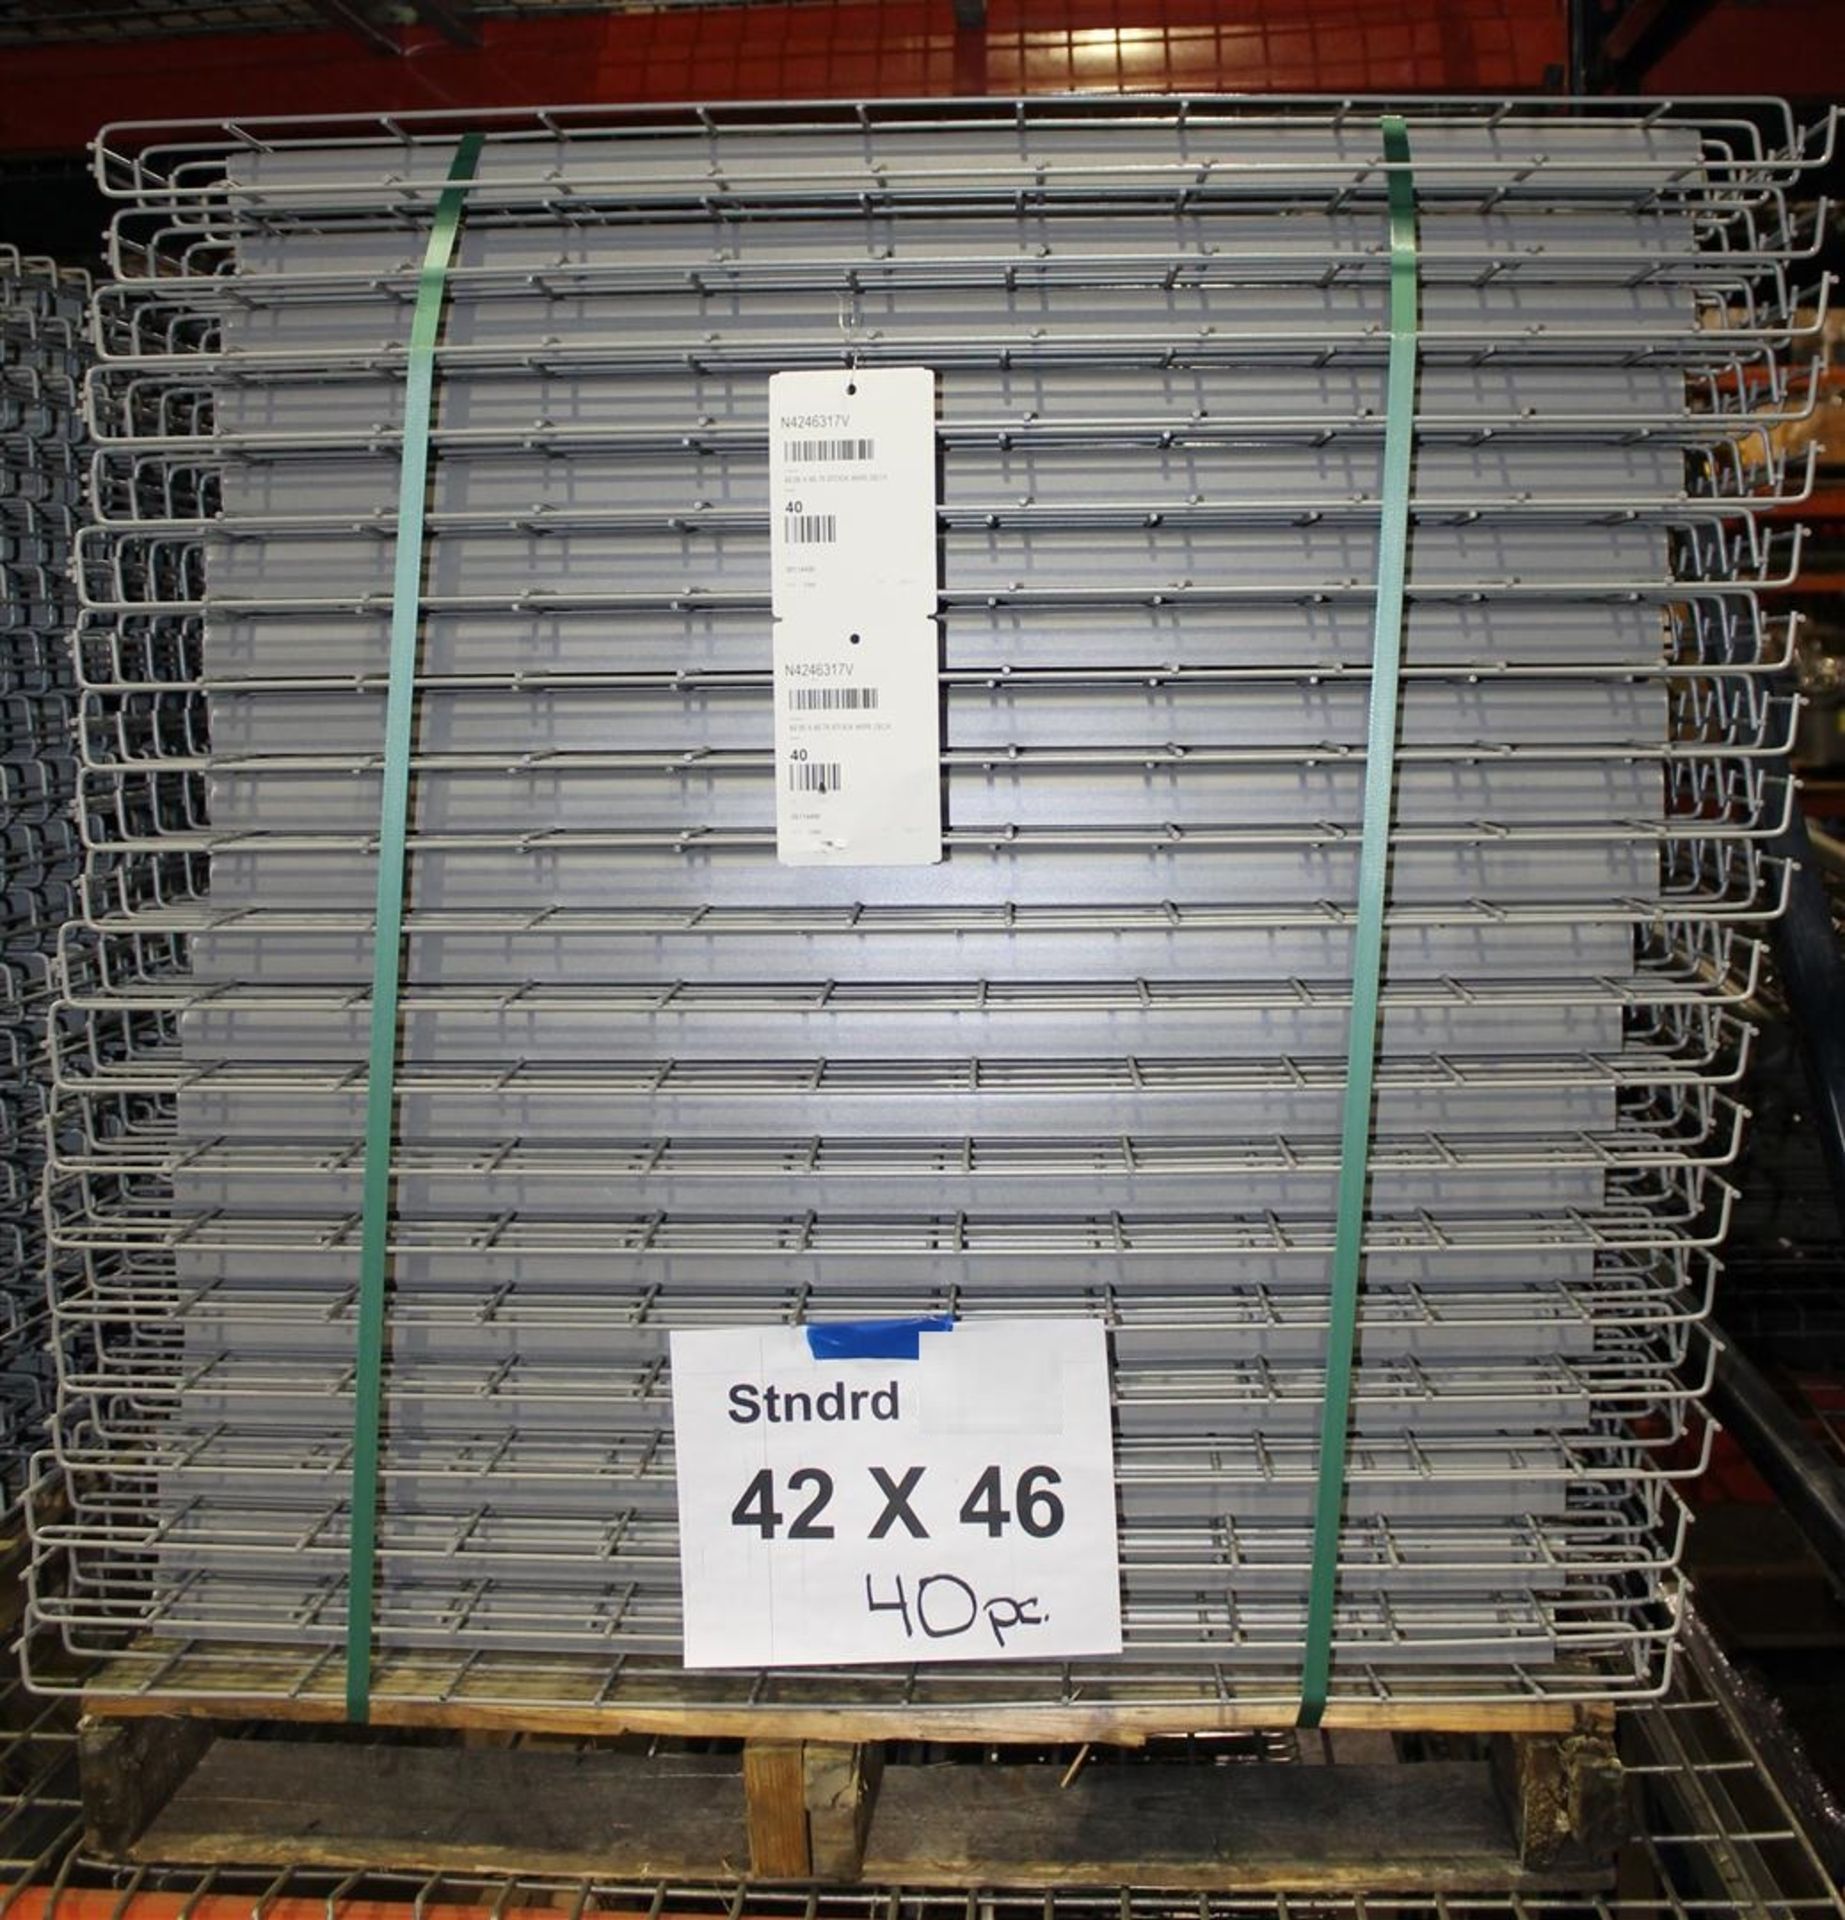 LIKE NEW TEAR DROP STYLE PALLET RACK WITH WIRE DECKING. SIZE: 16'H X 8'W X 42"D, 3" X 3" POST. - Image 4 of 4